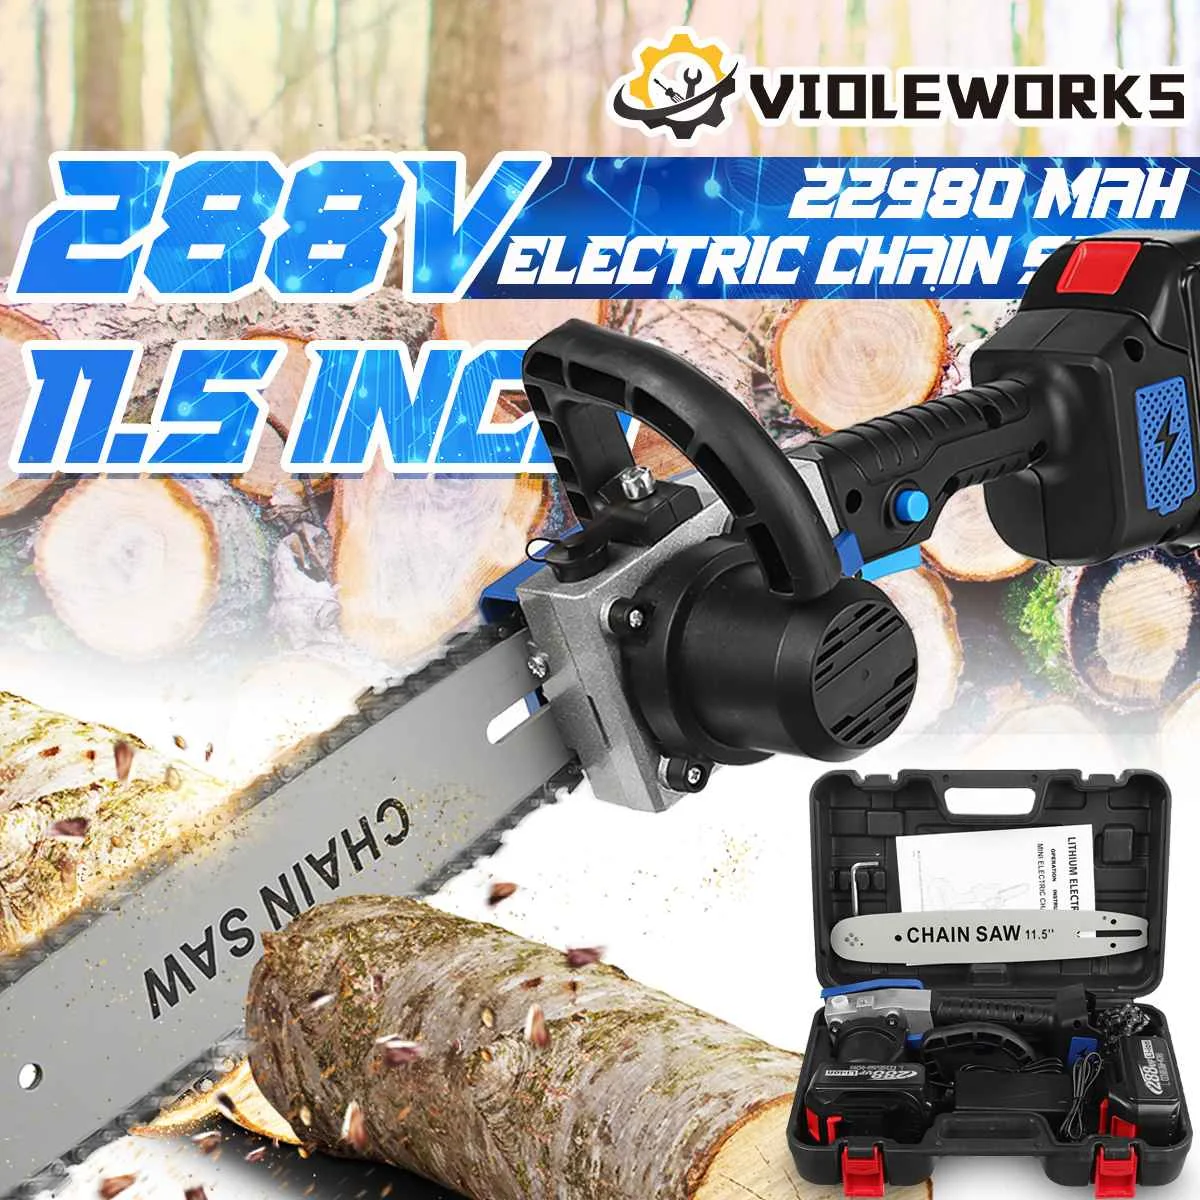 

NEW 288VF 11.5 Inch Electric Saw Chainsaw with 2PC 22980mAh Battery Brushless Motor Rechargeable Wood Cutter For Makita Battery